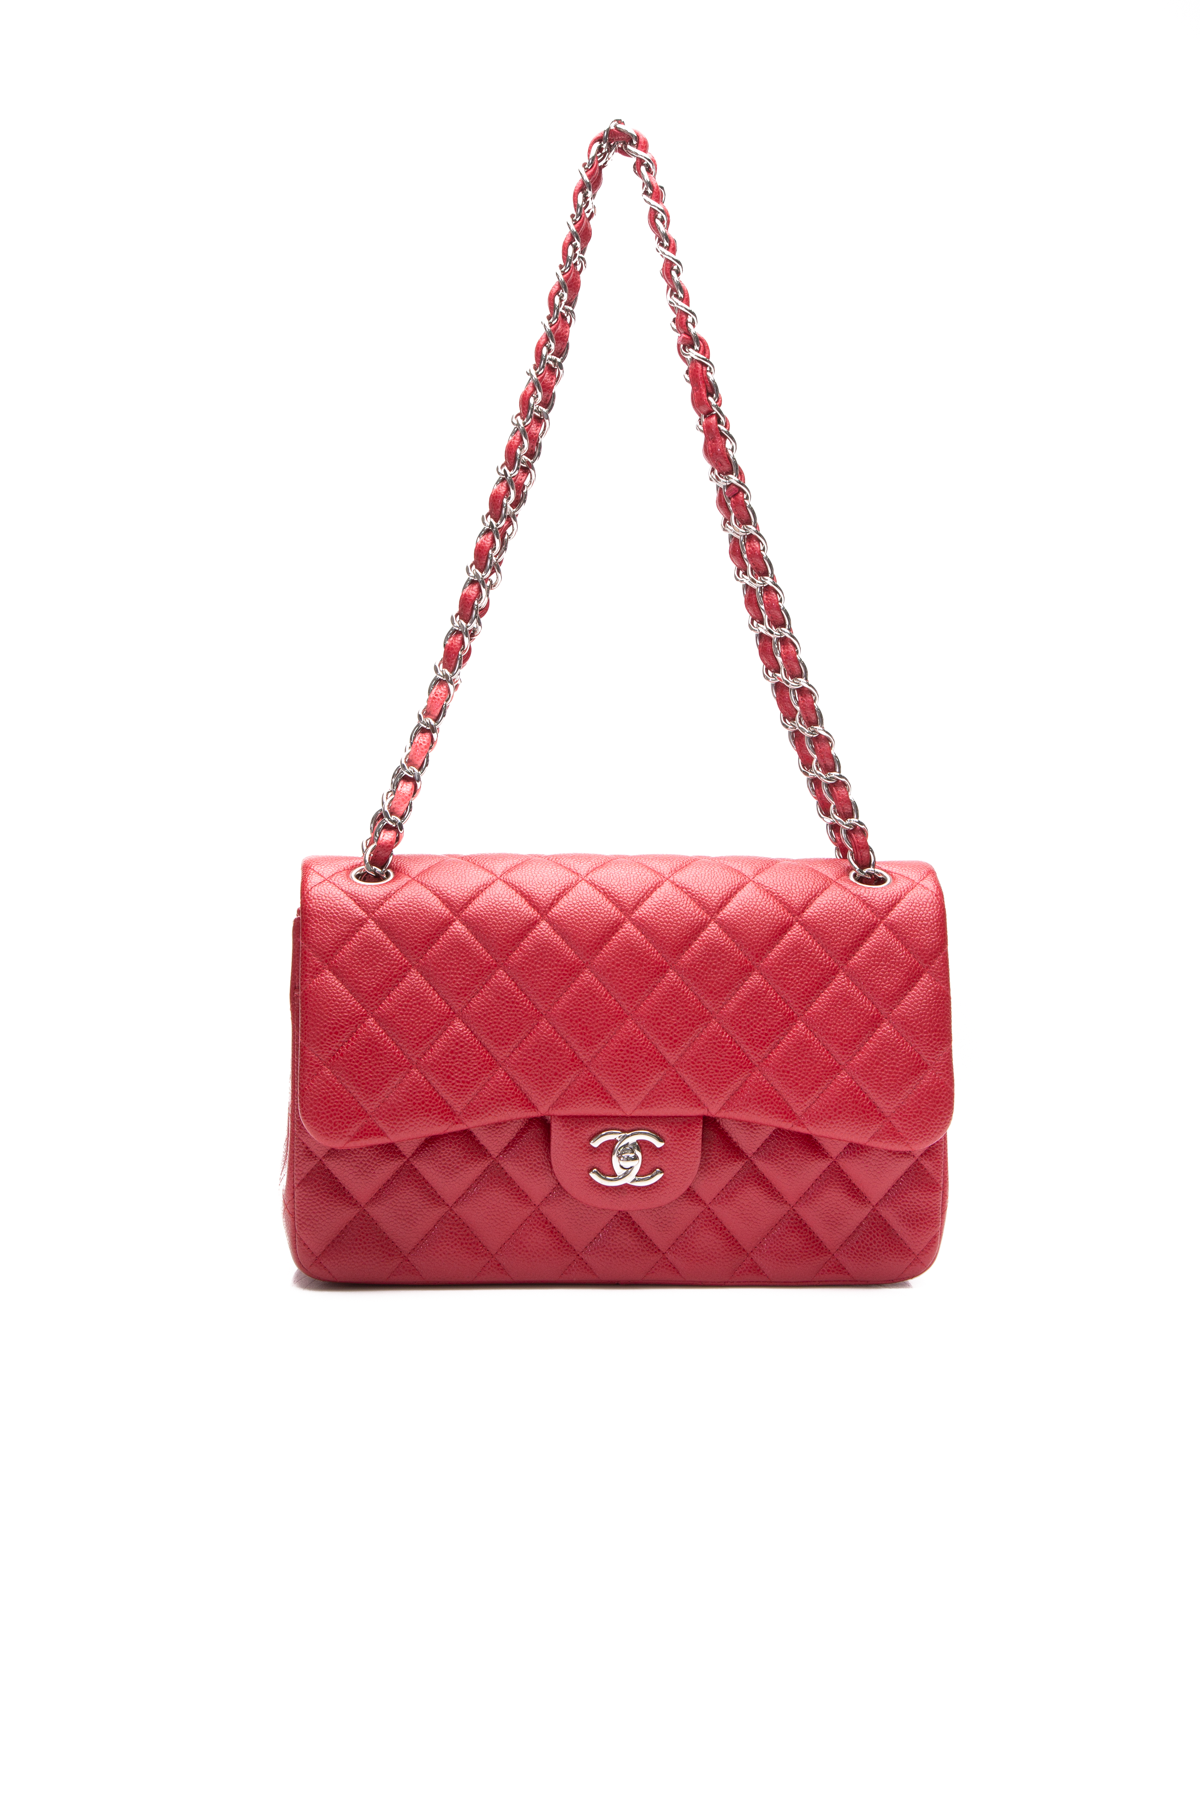 chanel deauville tote red